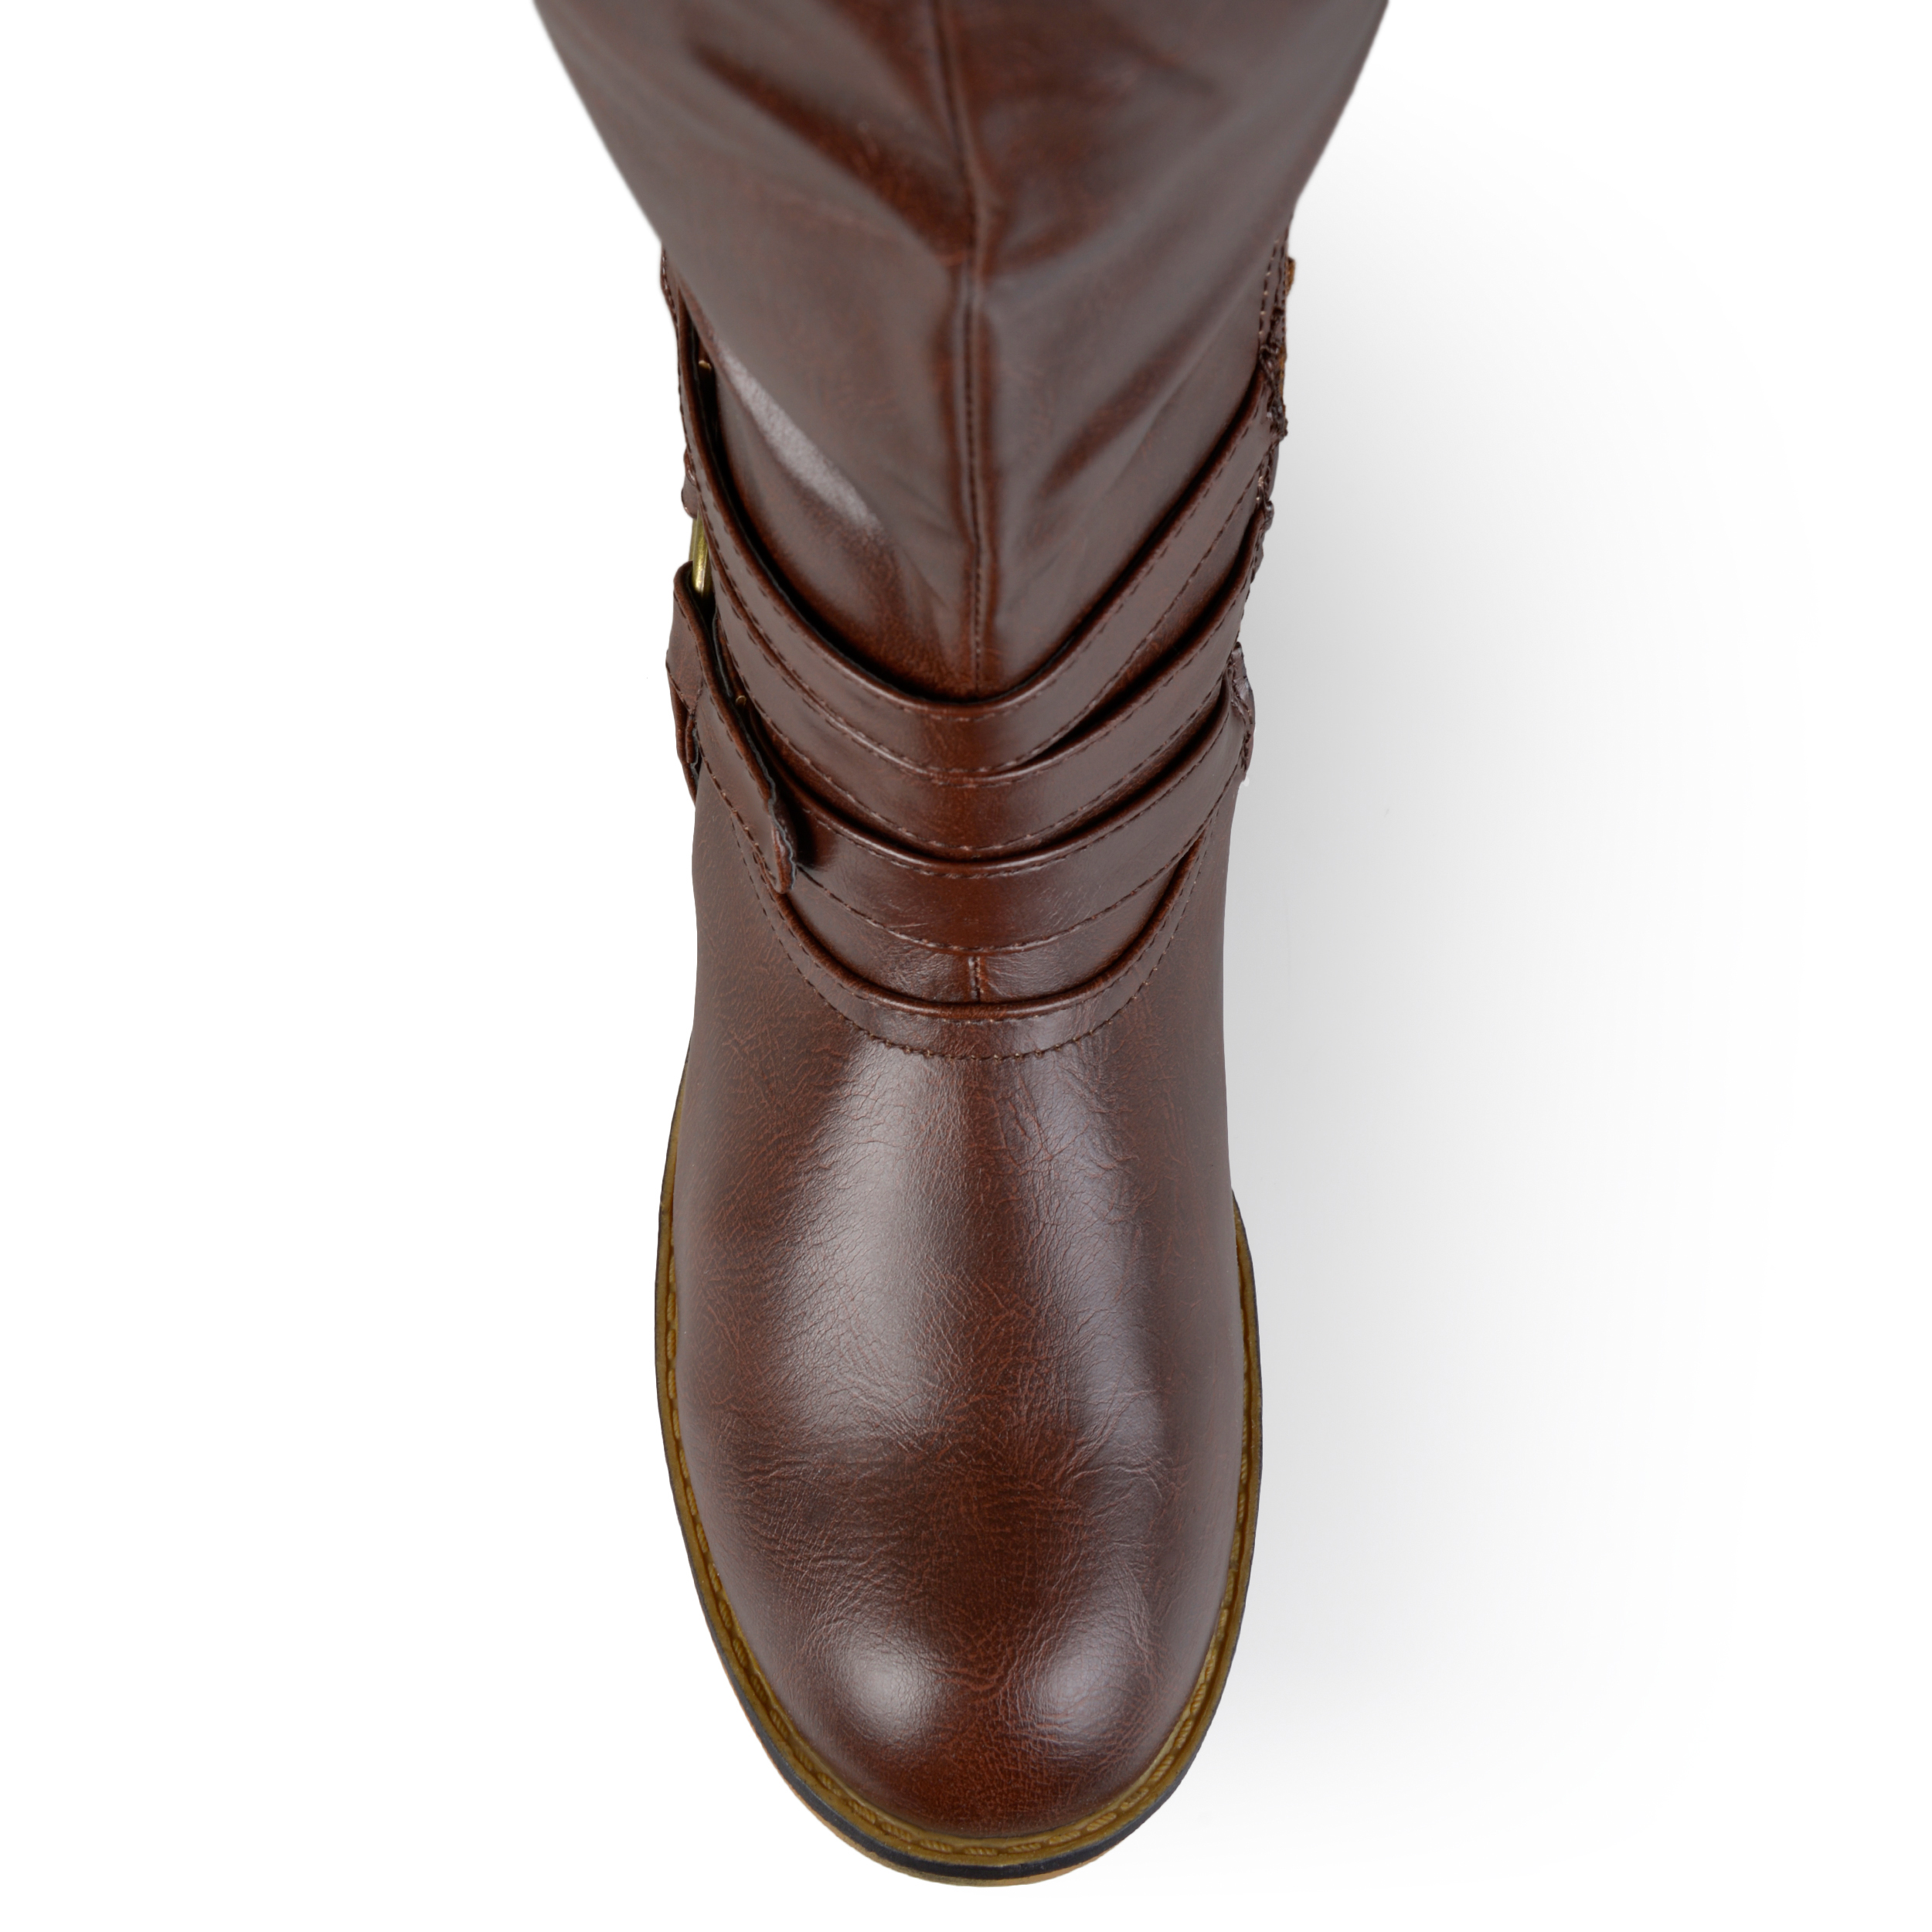 Brinely Co. Women's Mid-calf Wide Calf Riding Boots - image 5 of 9